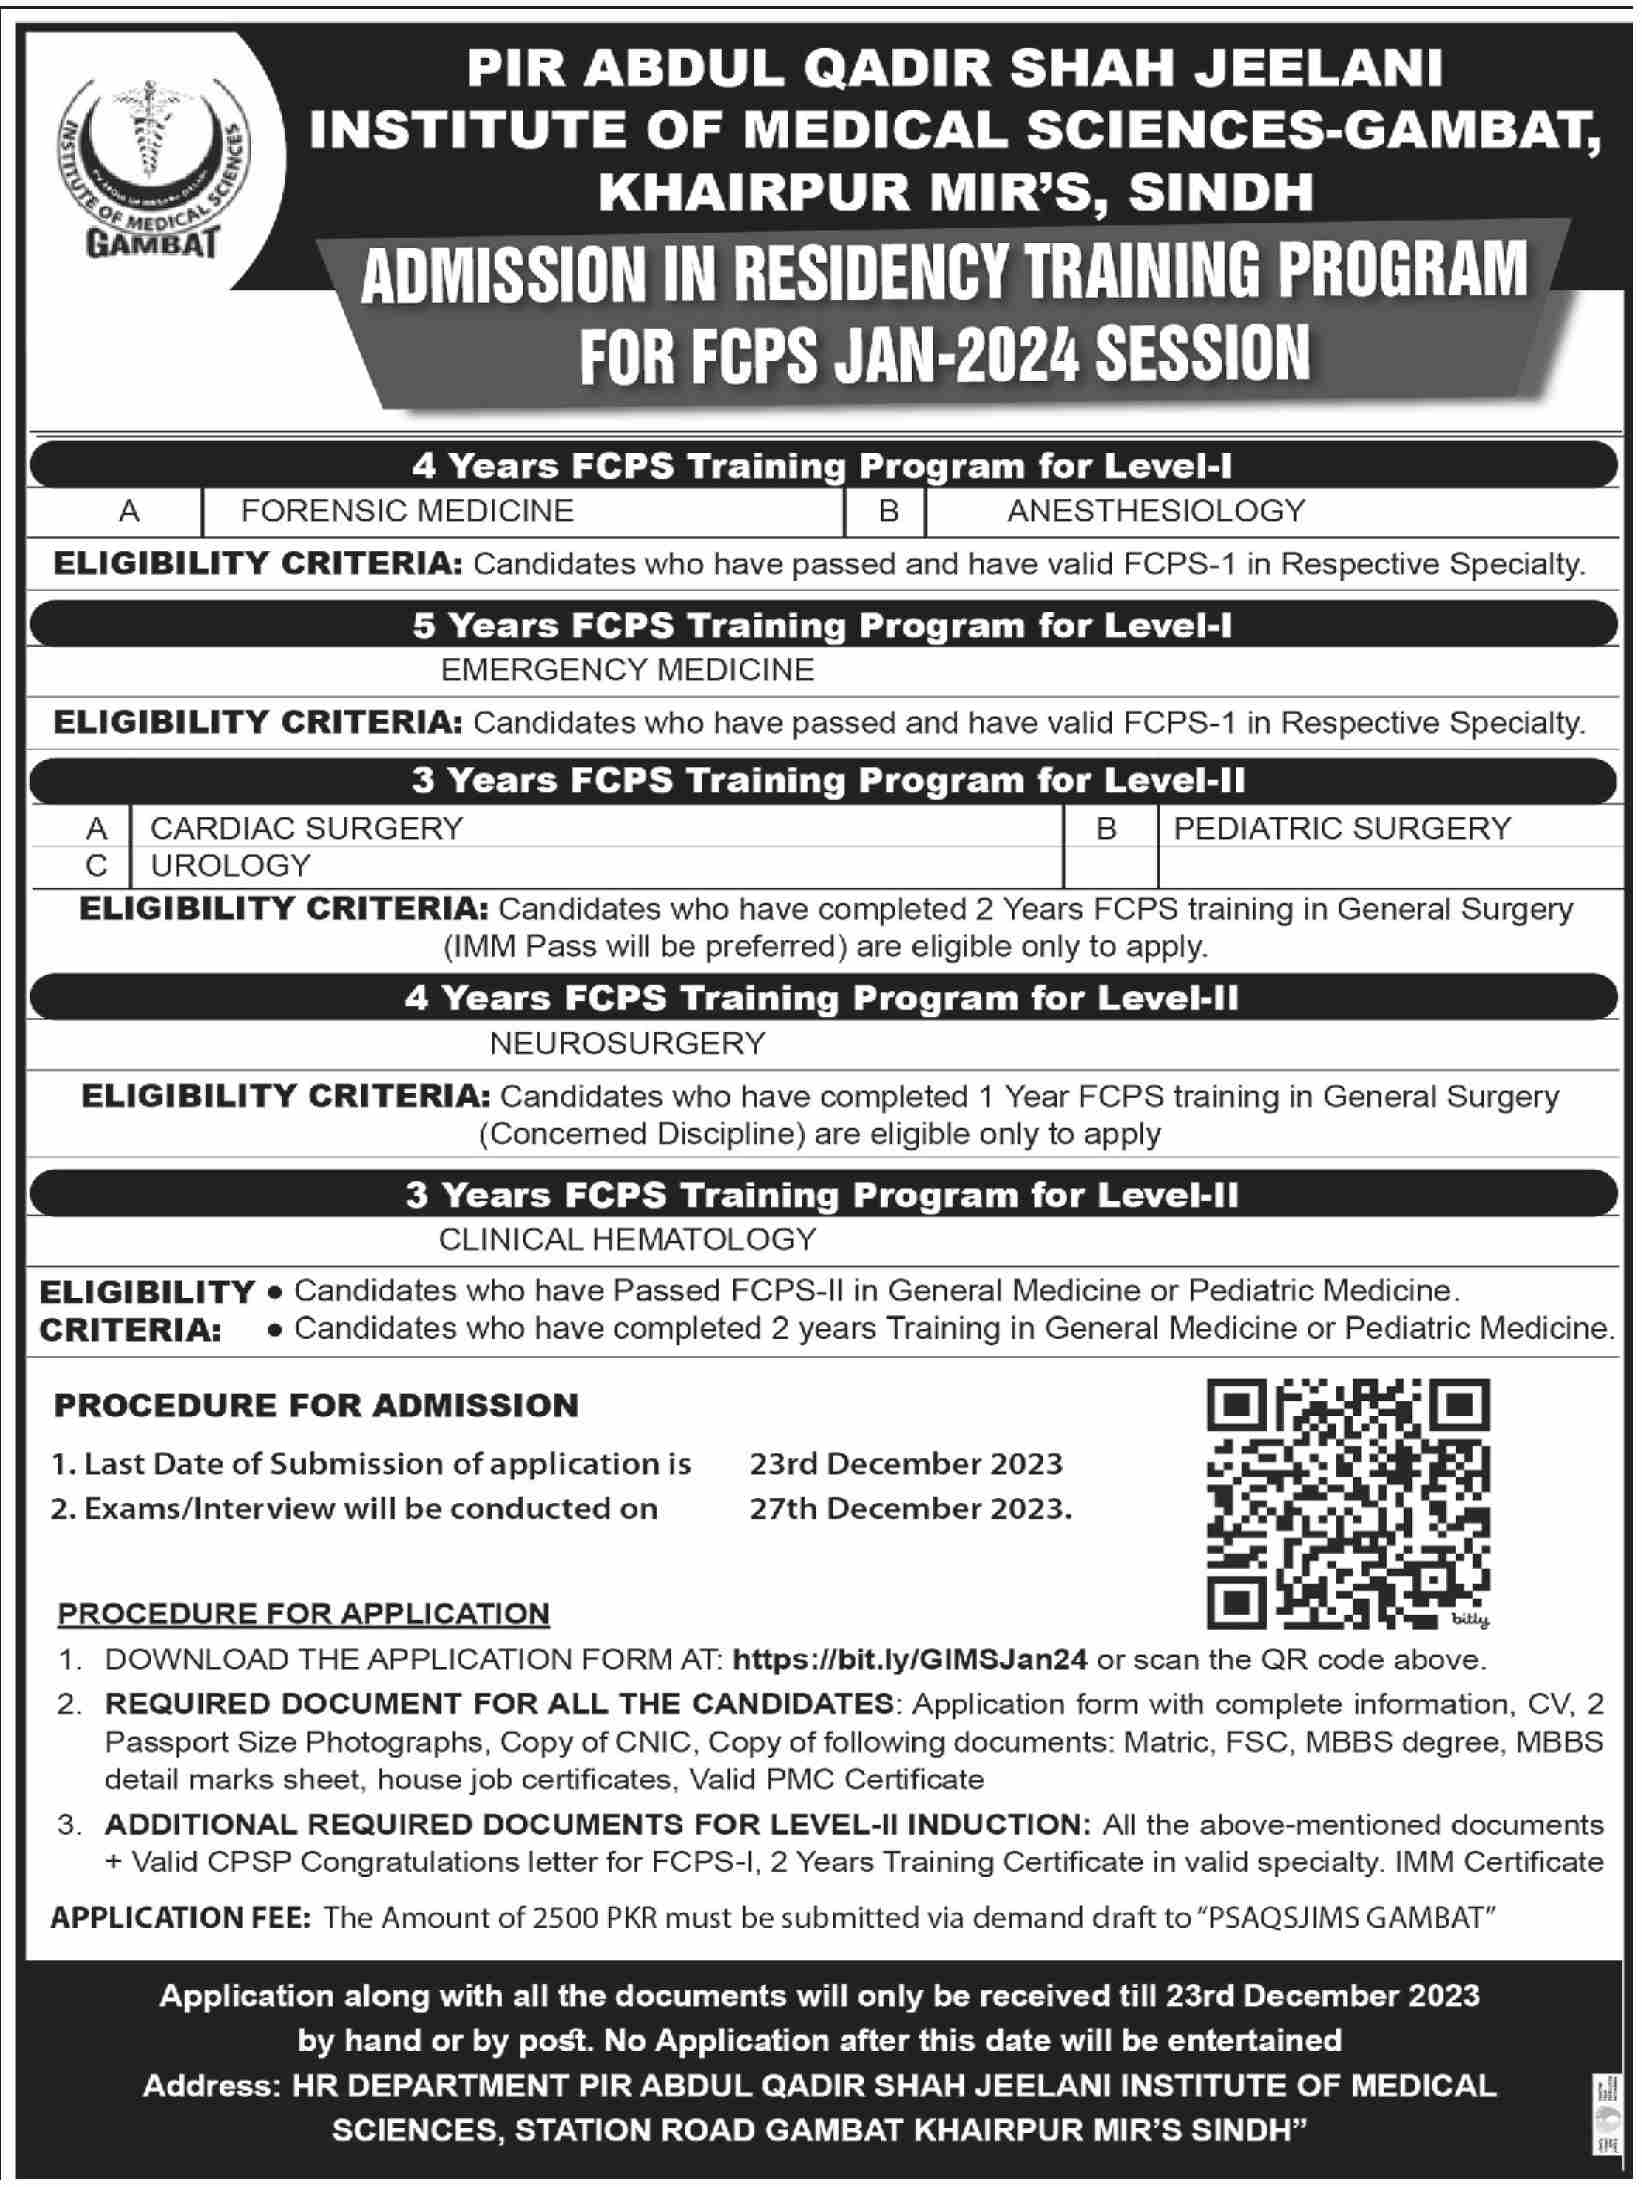 Institute of Medical Sciences Gambat Admission in Residency Training Program FCPS Jan-2024 Session